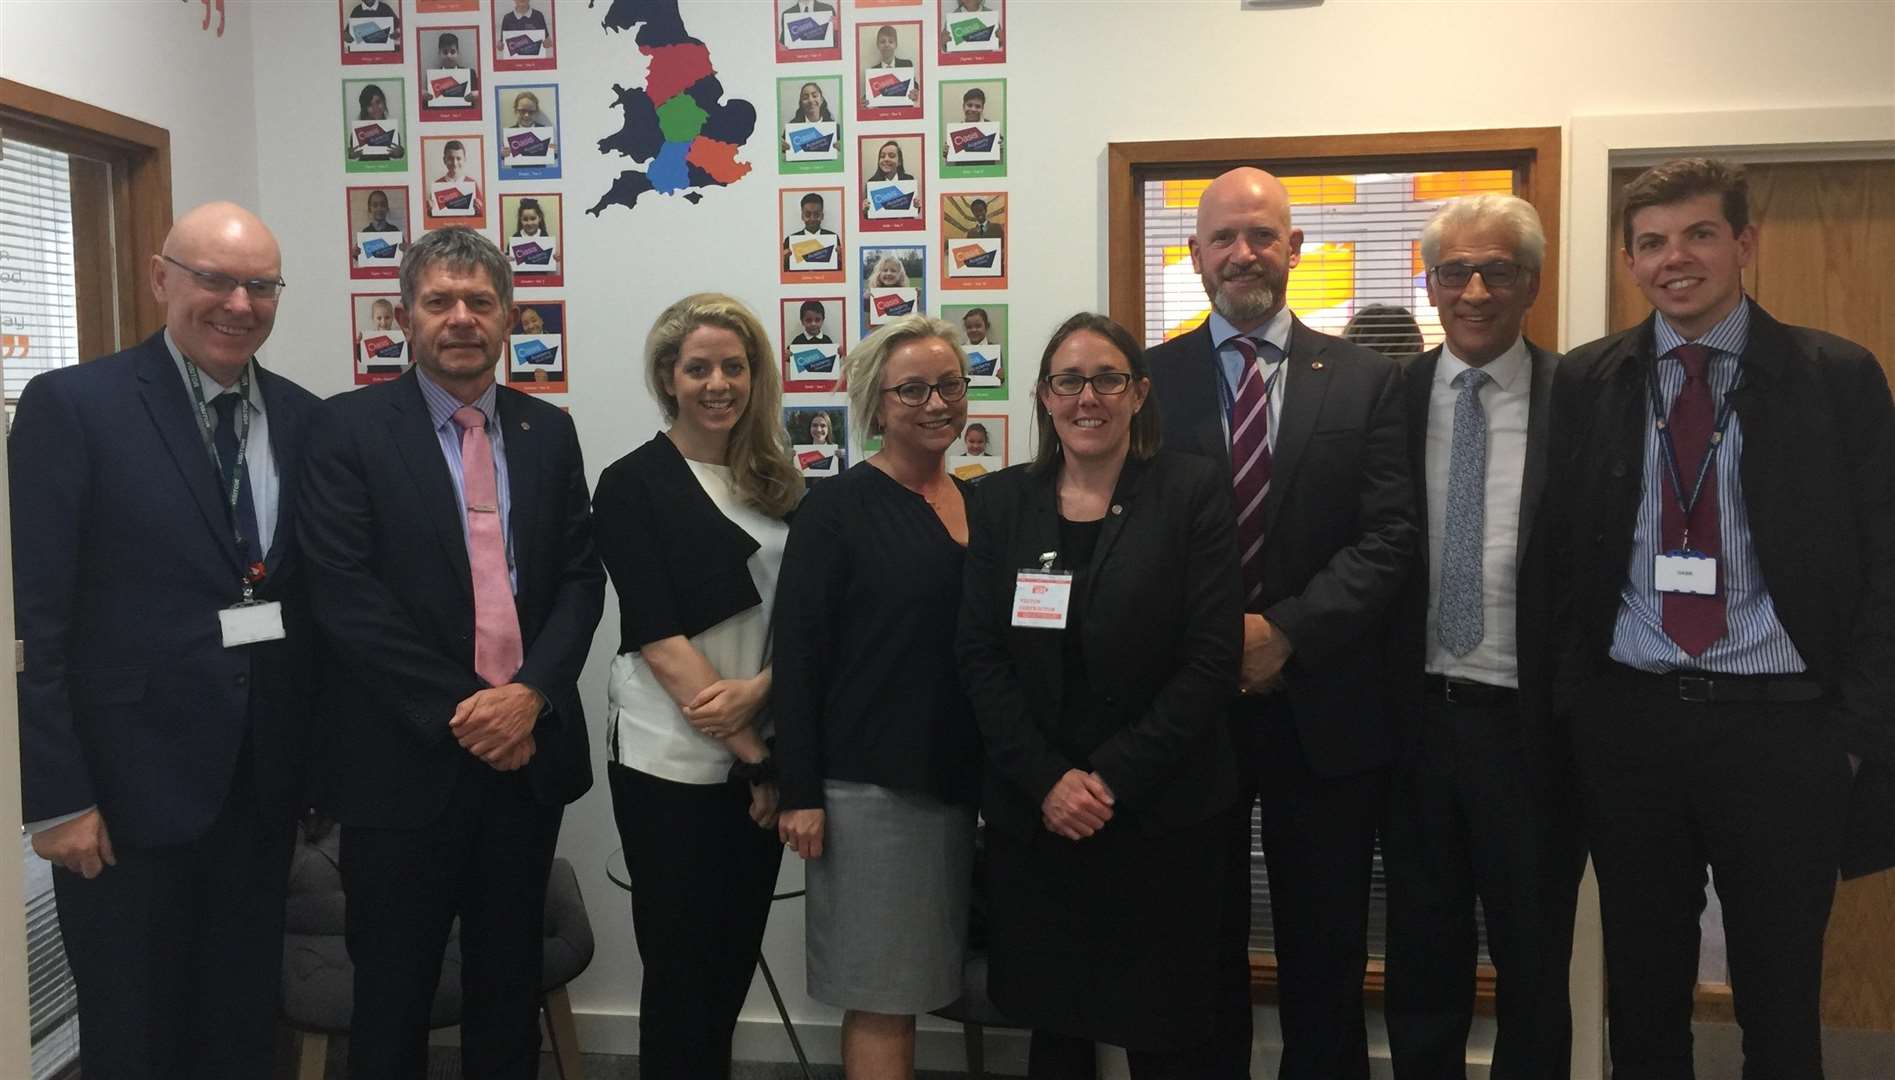 Tina Lee is appointed new principal at the Oasis Isle of Sheppey Academy. From the left, Phil Beaumont, Graham Tuck, Carly Mitchell, Kirstie Fulthorpe, Tina Lee (centre), Oasis chief executive oficer John Murphy, founder Steve Chalke and Matt Tiplin. (sub) (2325868)